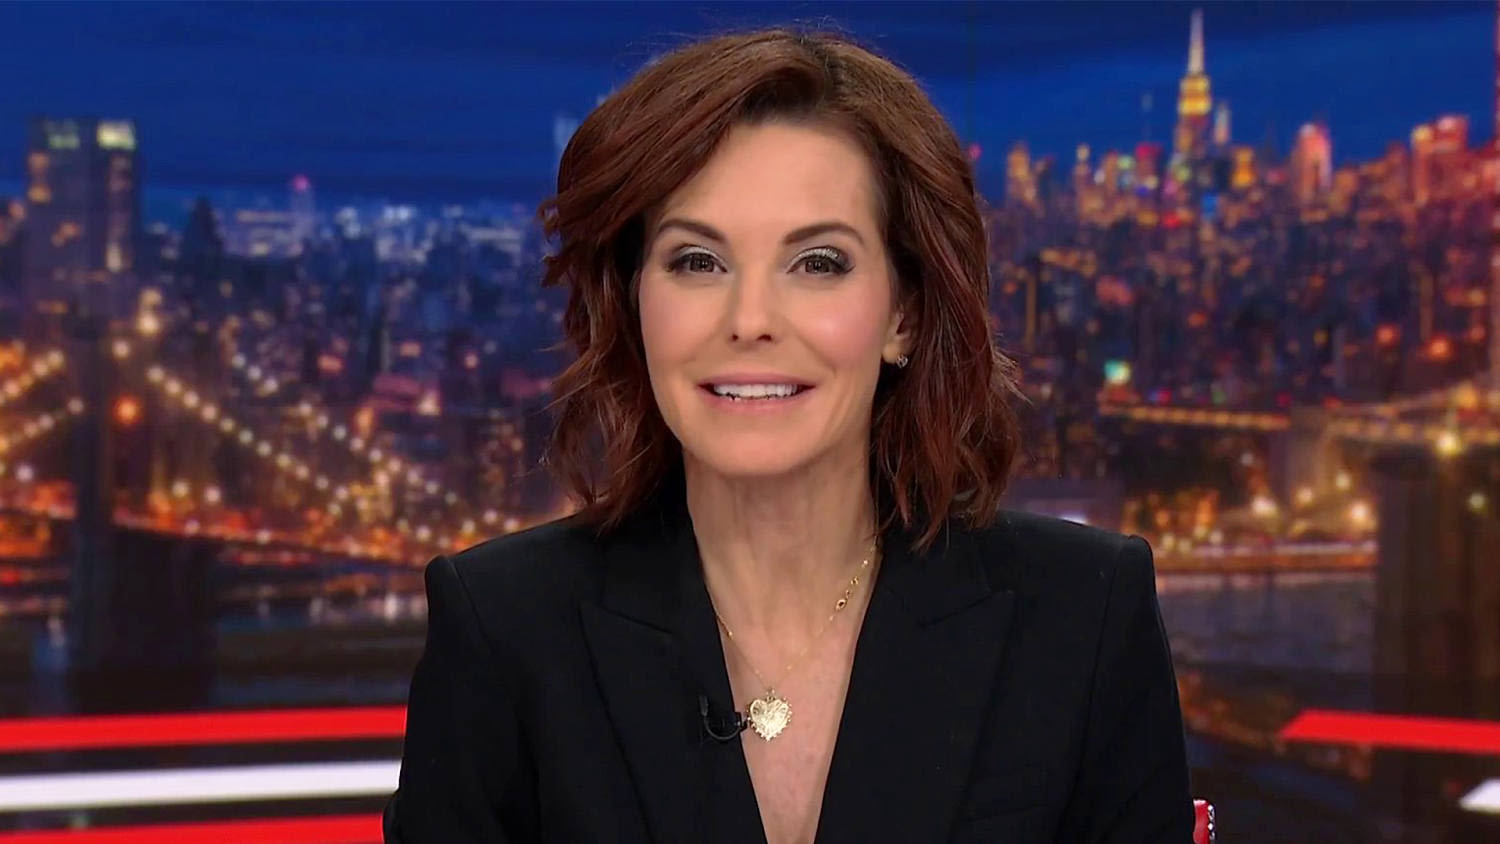 Watch The 11th Hour With Stephanie Ruhle Highlights: May 8